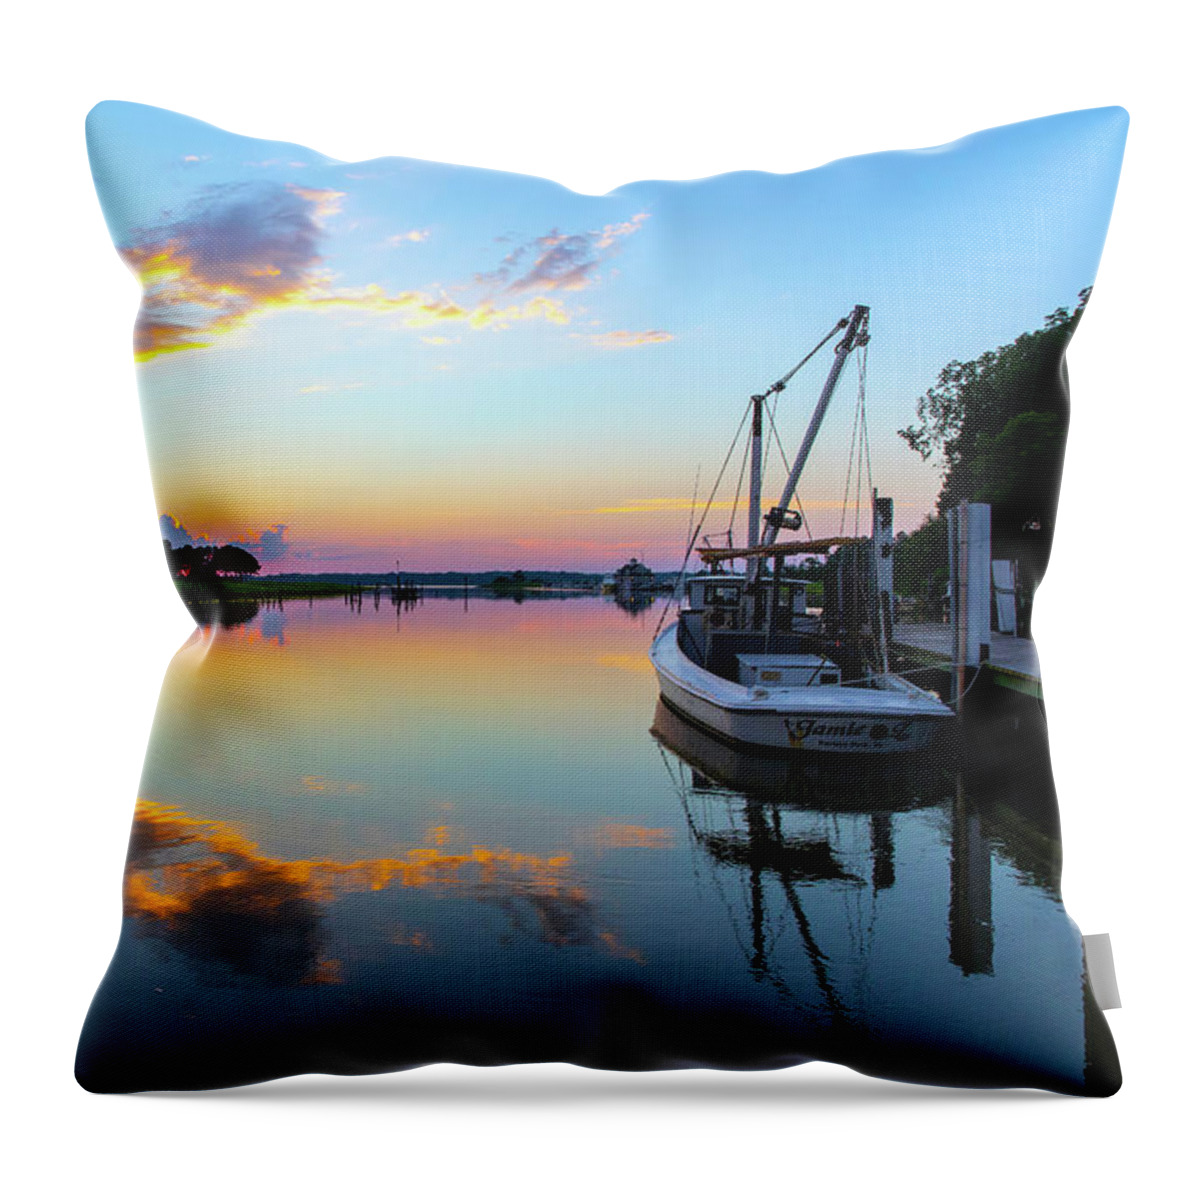 Sunset Throw Pillow featuring the photograph Sunset In Rescue II by Amy Jackson